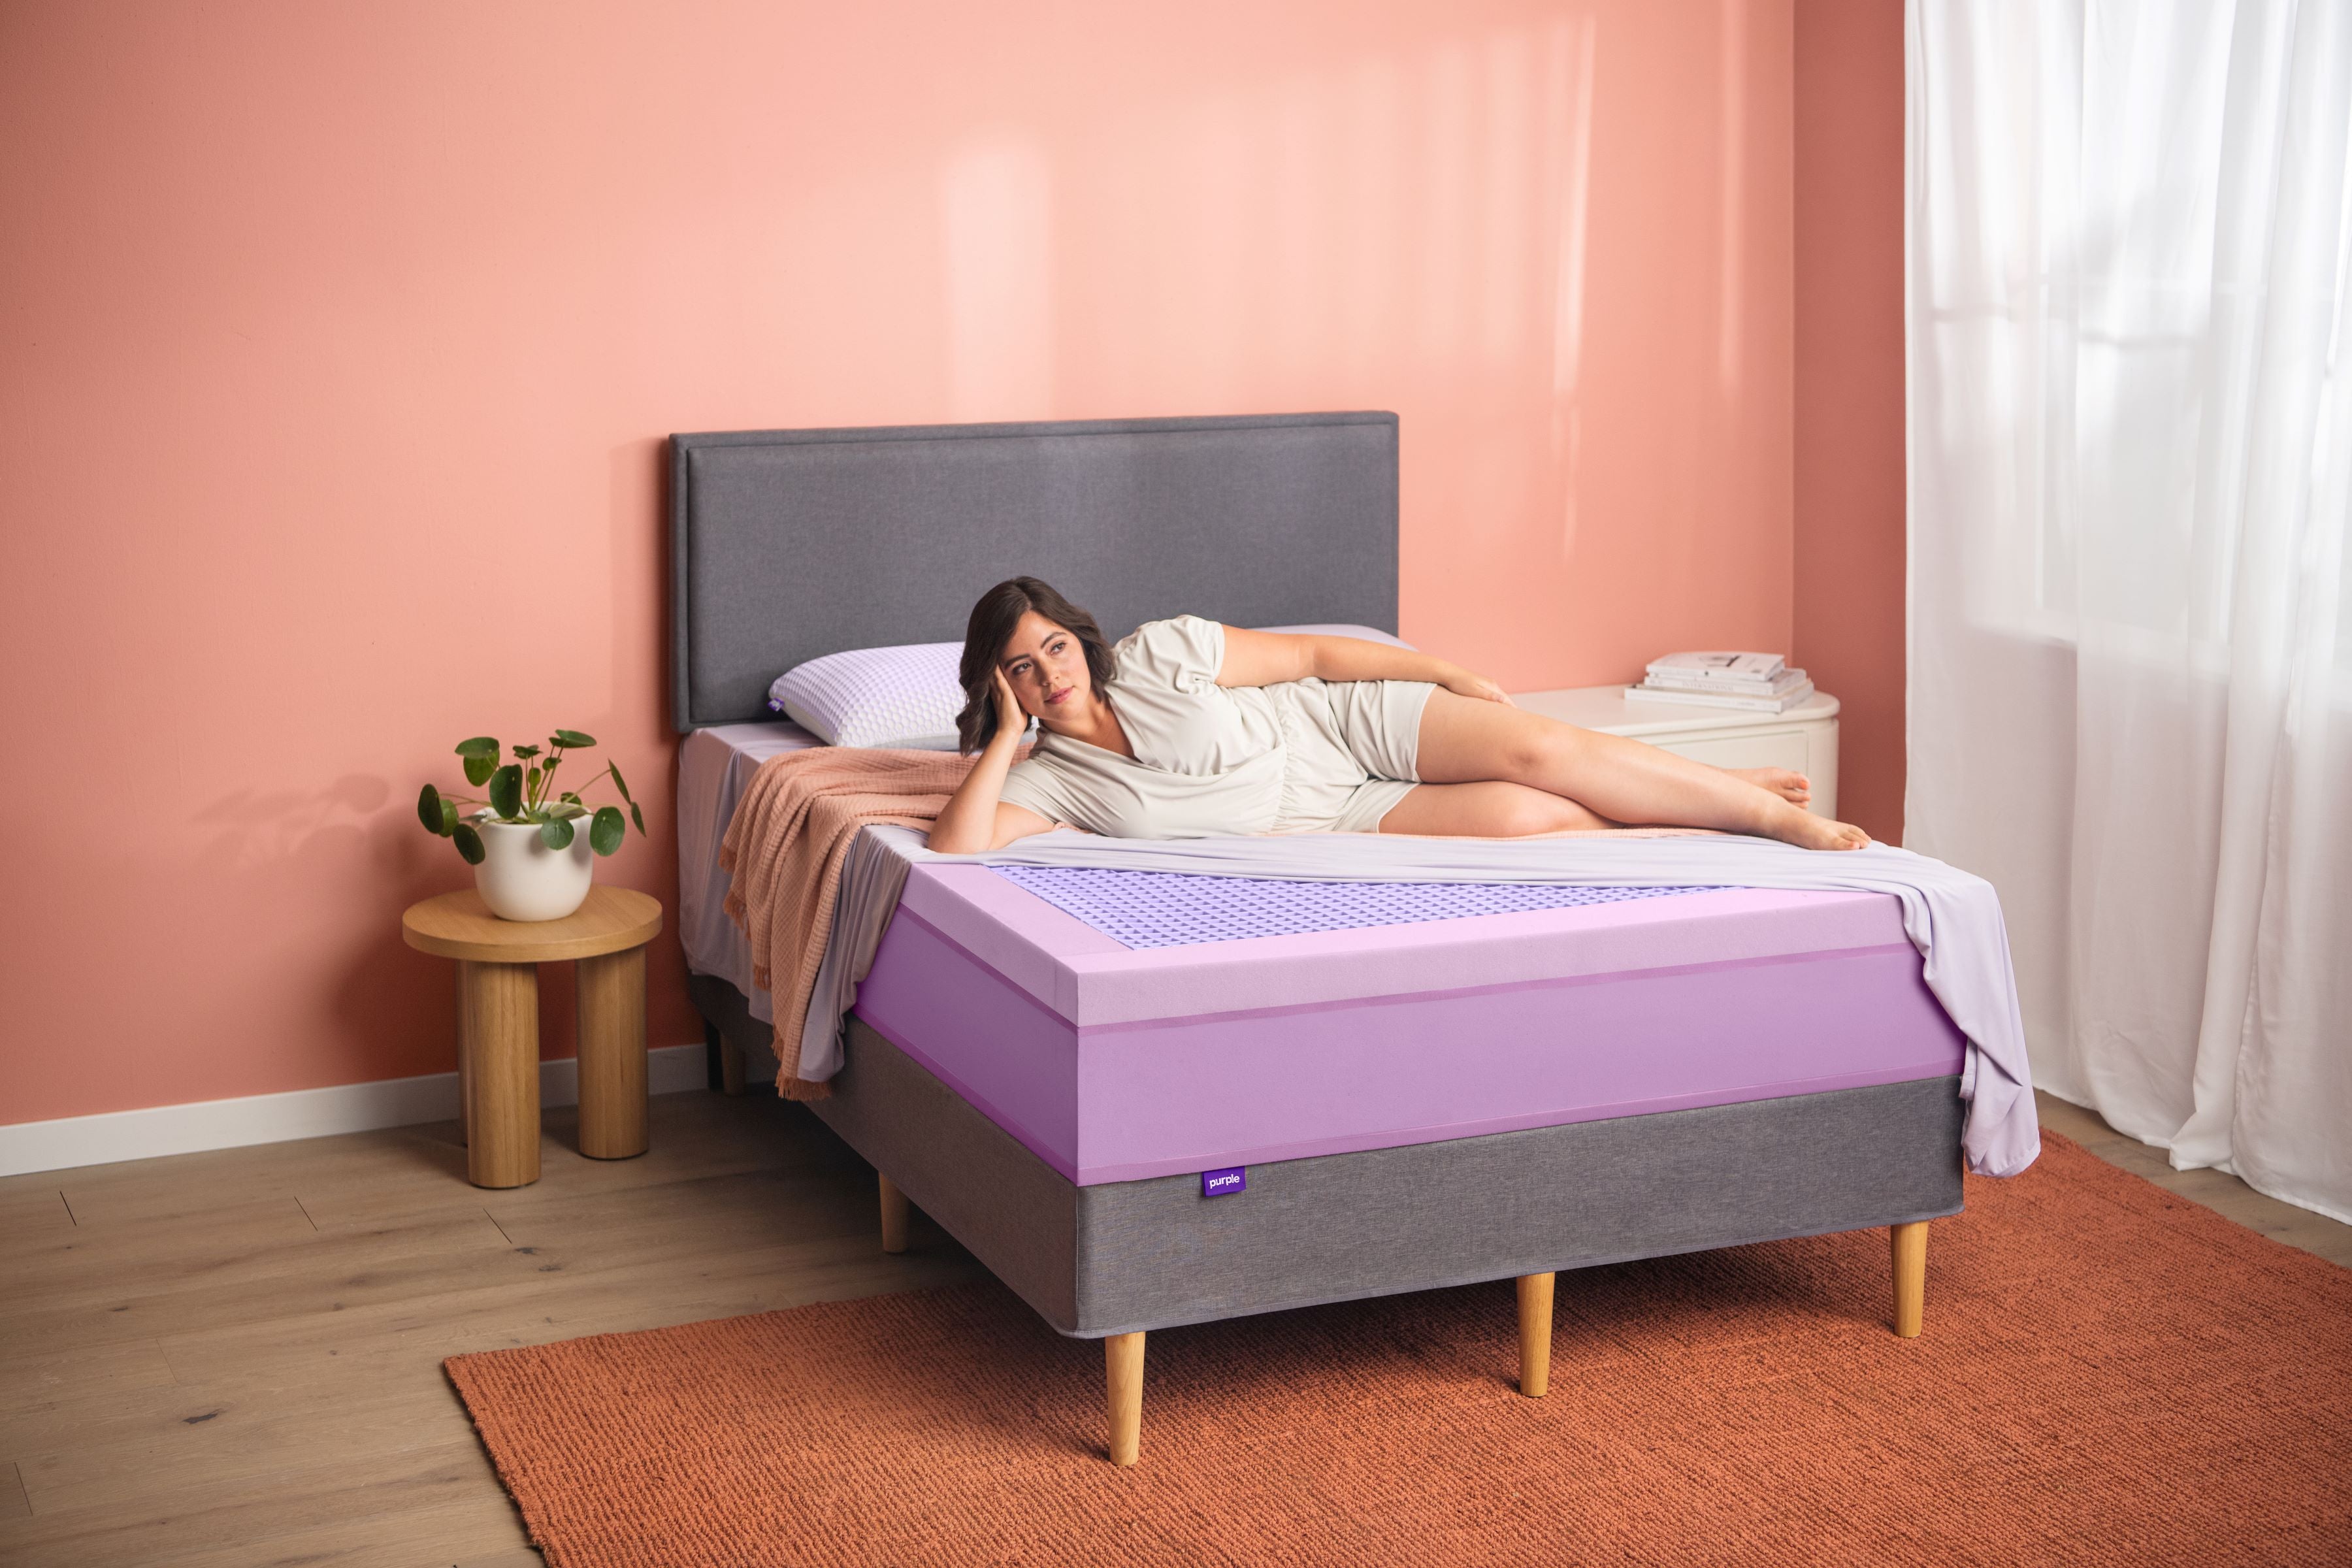 is state rccycleing fee refund for purple mattress